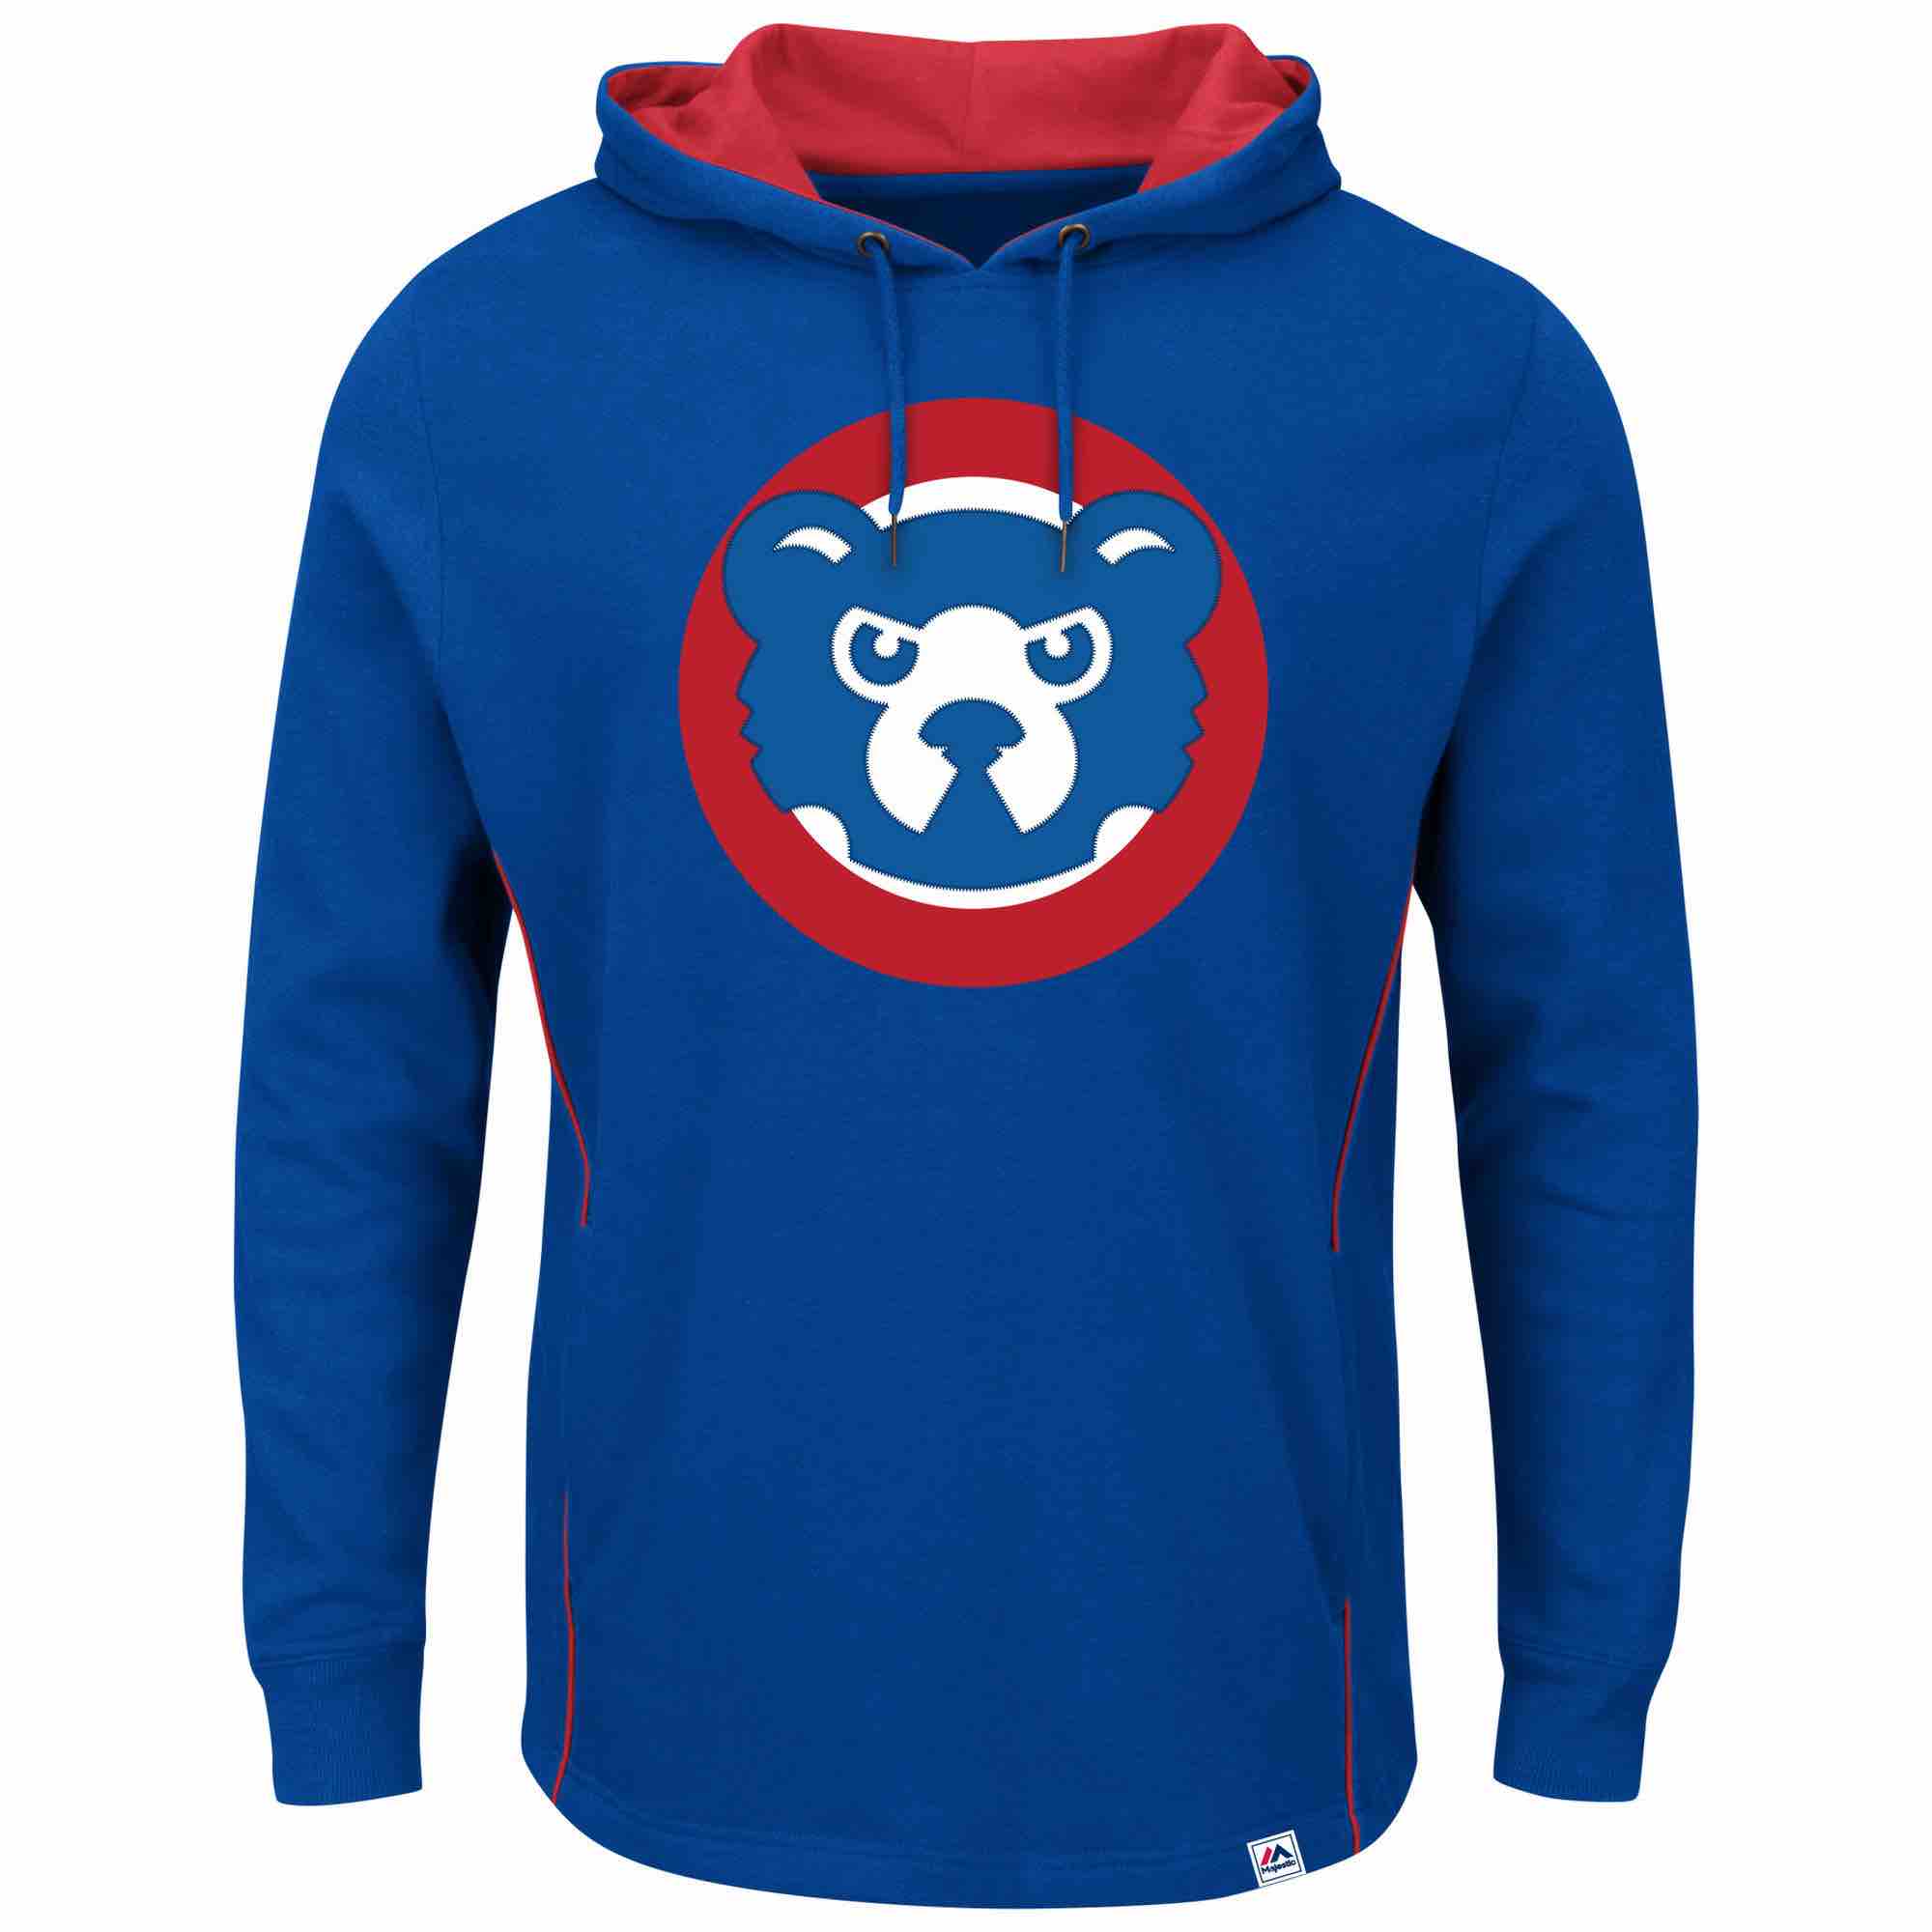 MLB Chicago Cubs Personalized Blue Color Stitched Hoodie